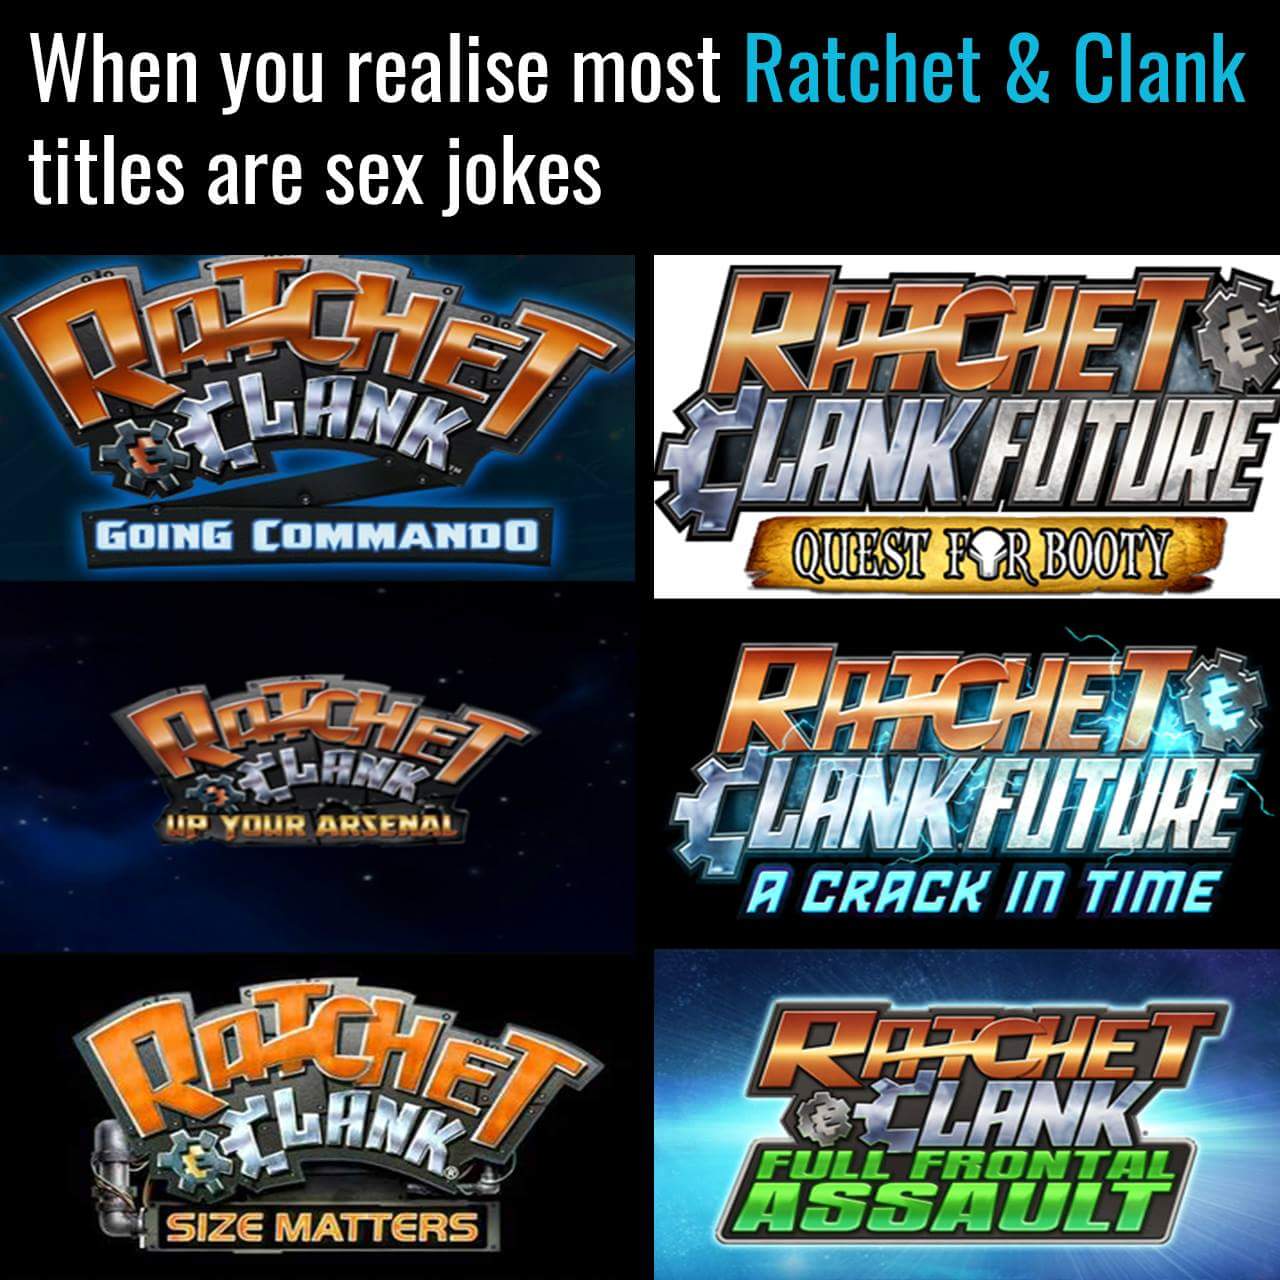 ratchet and clank titles - When you realise most Ratchet & Clank titles are sex jokes Richete Clank Future Quest For Booty Going Commando Clank Future Wp Your Arsenal A Crack In Time Ratchet e Lankt Size Matters